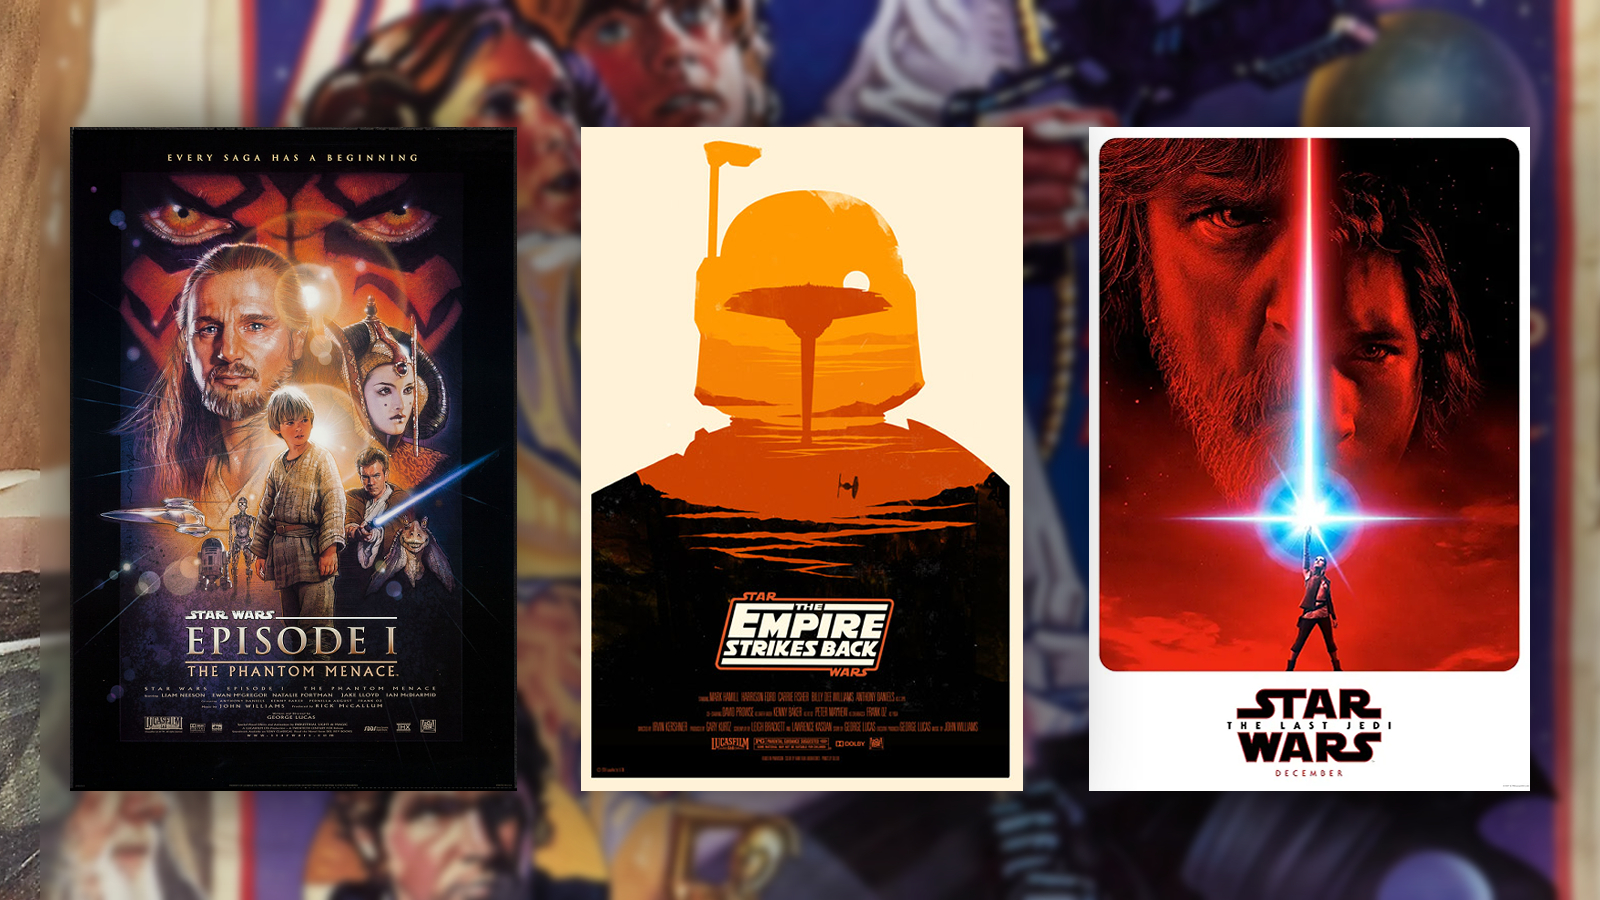 A triptych of Star Wars posters